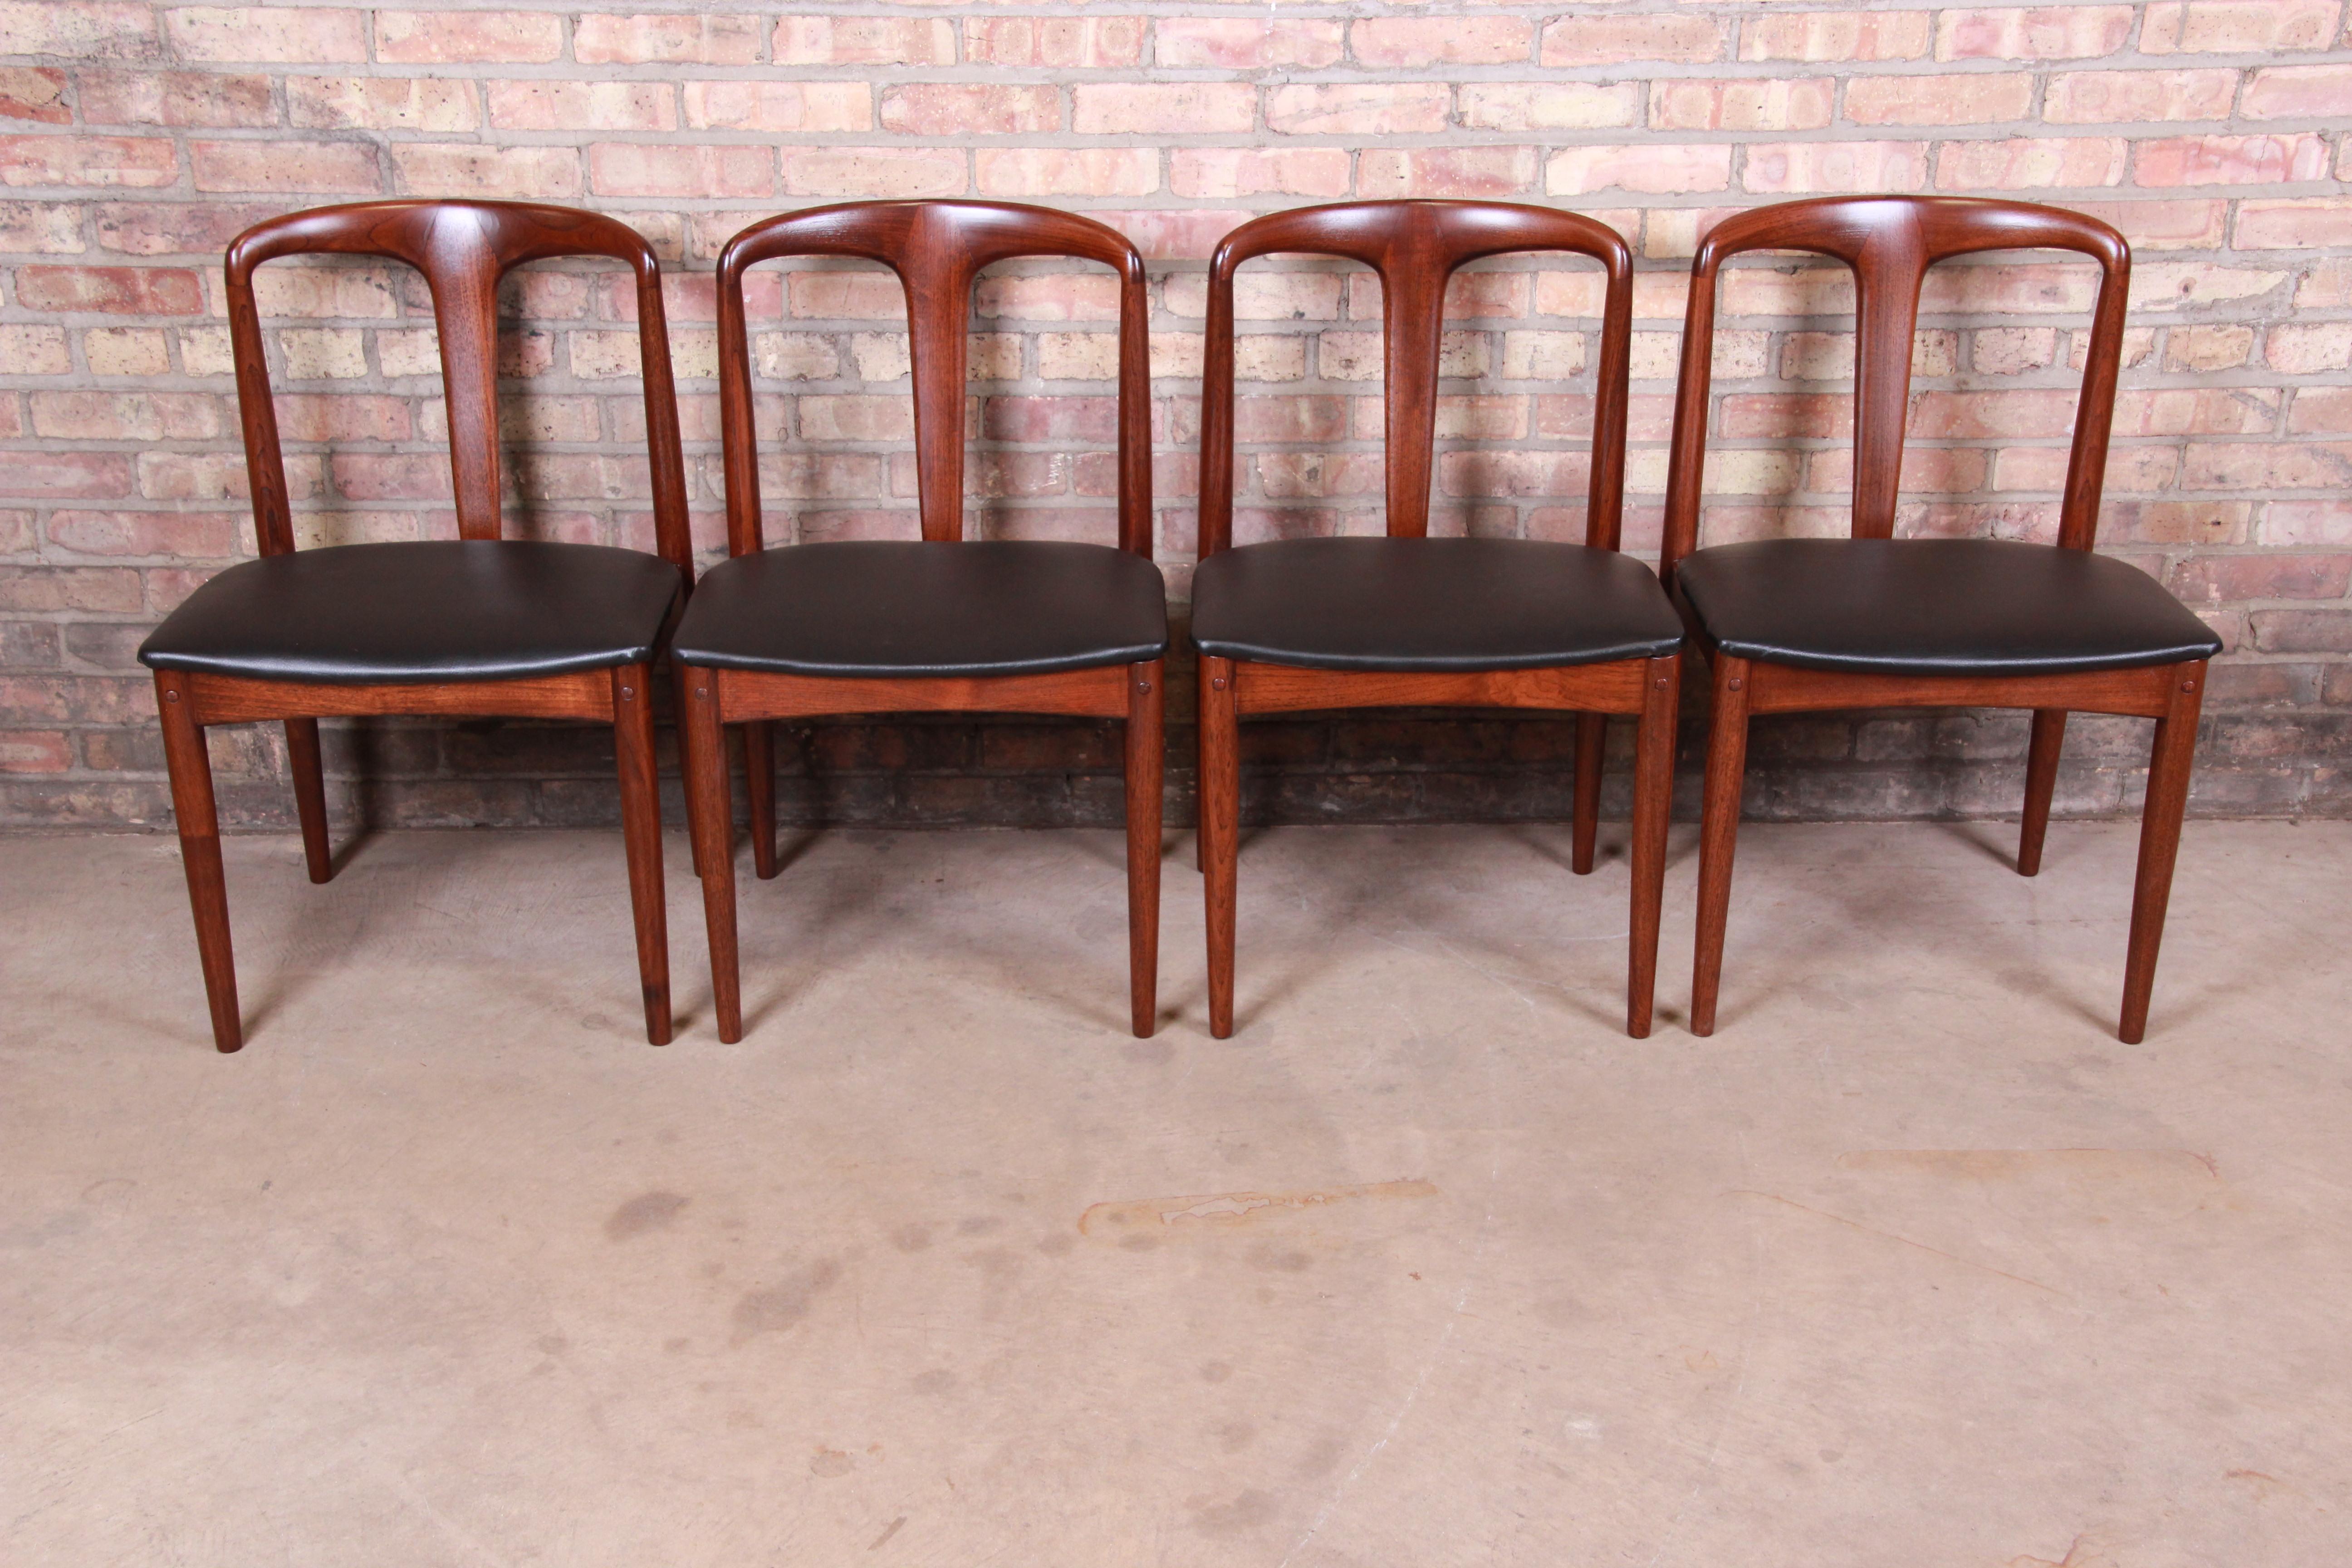 An exceptional set of four midcentury Danish modern 